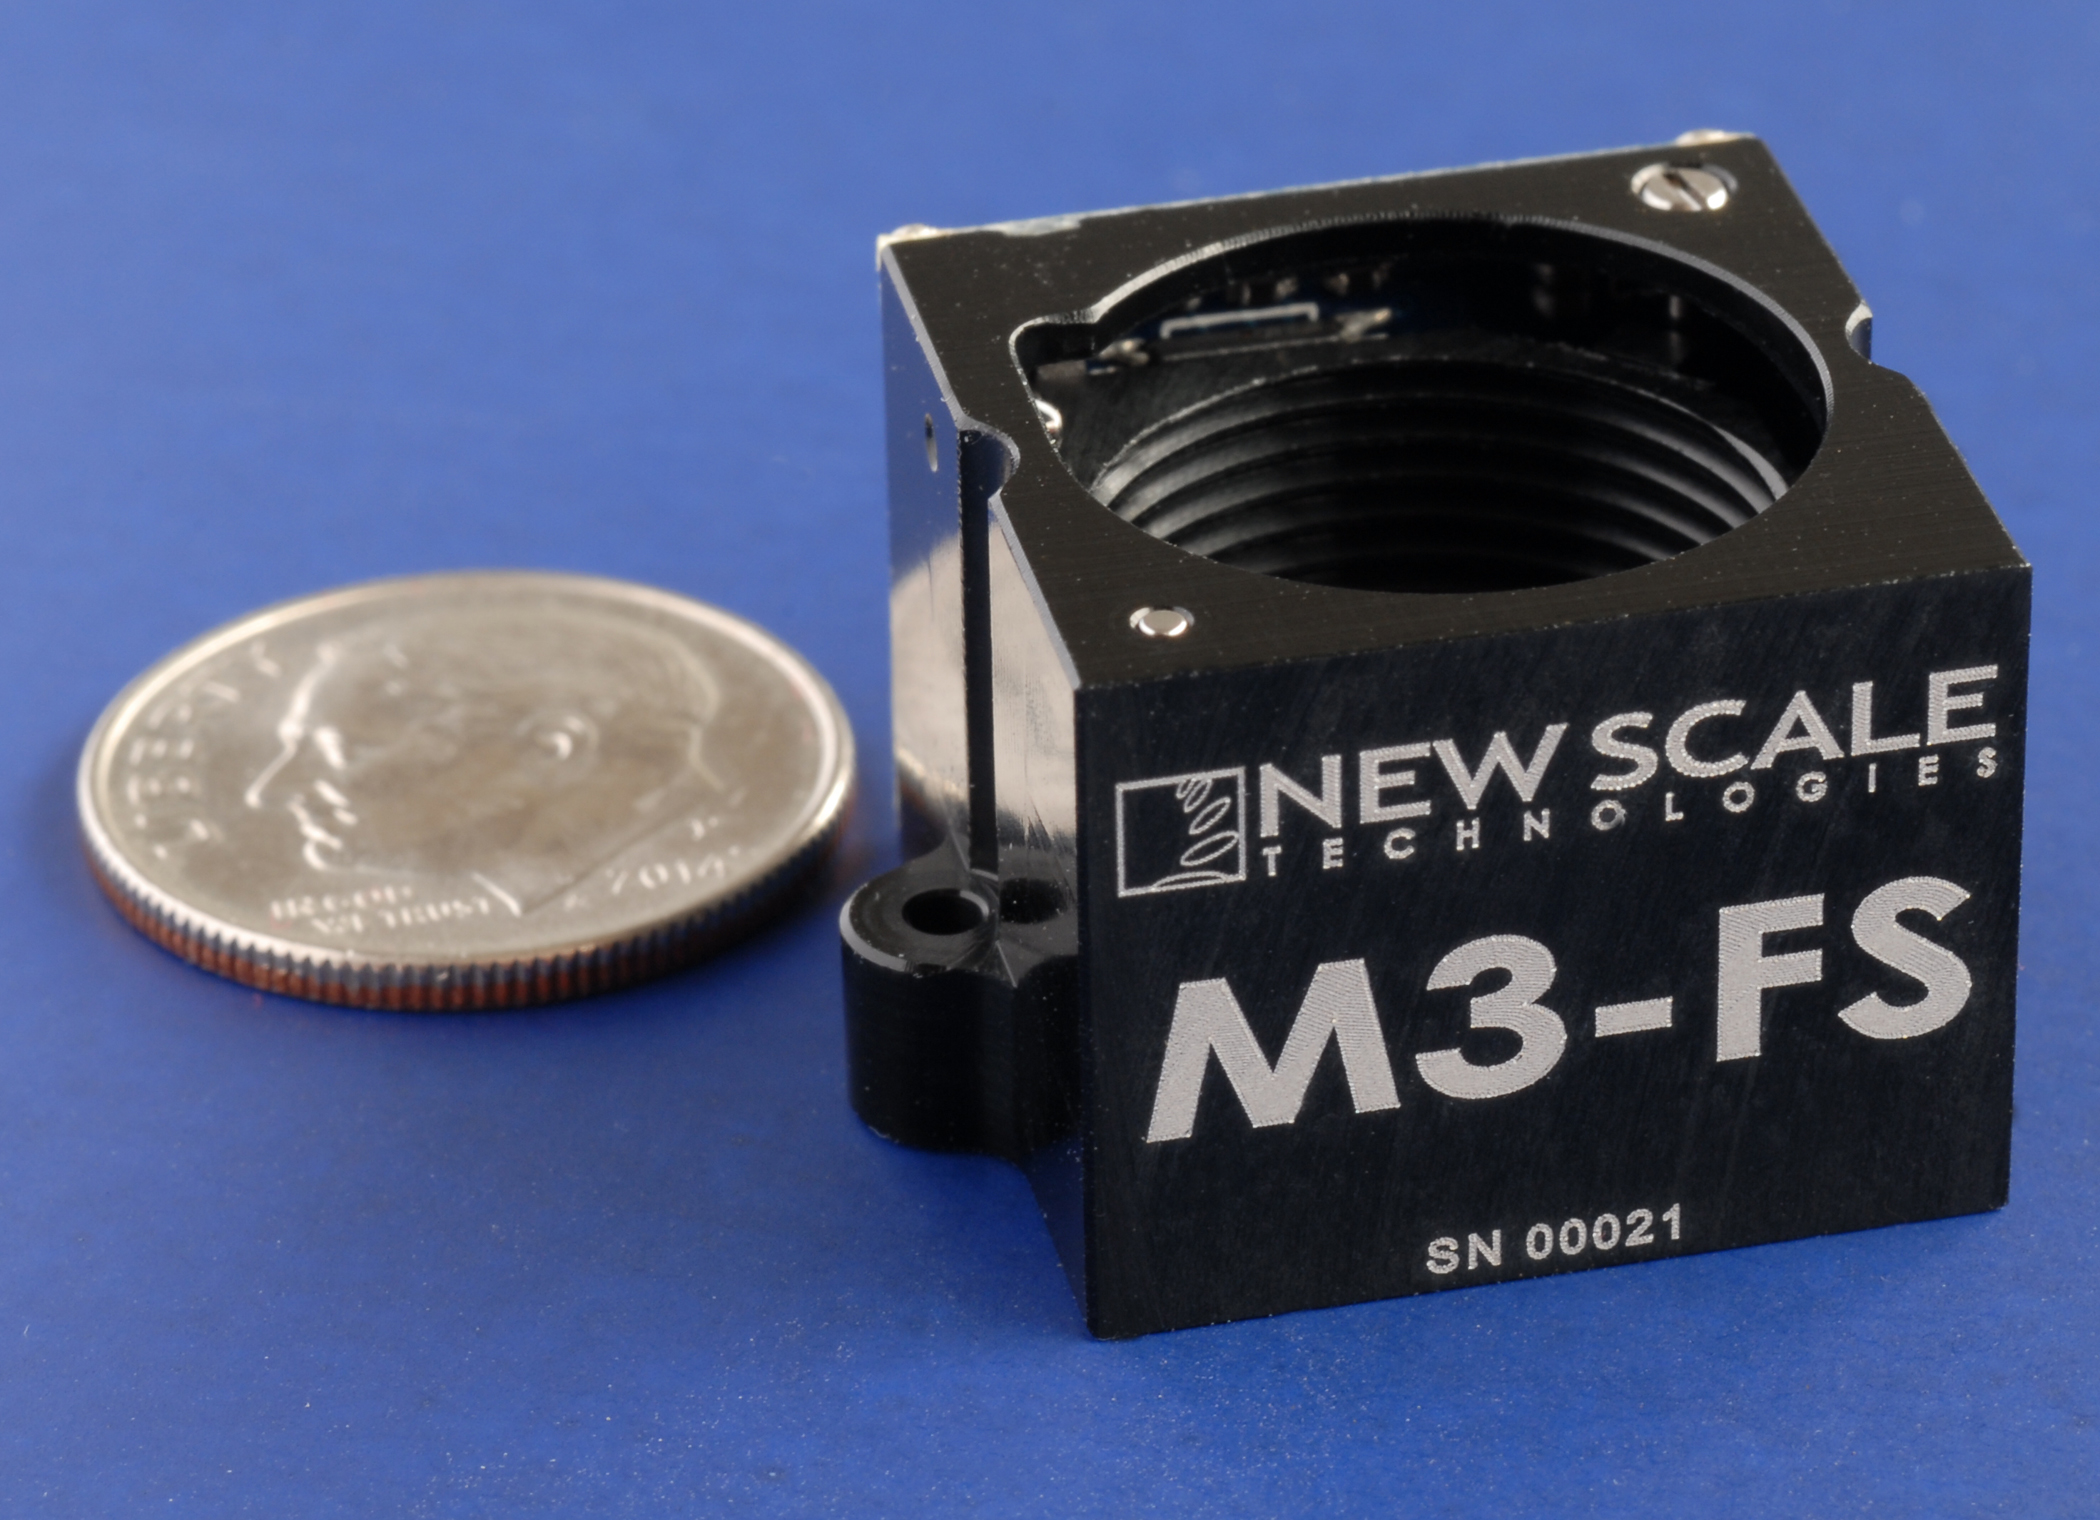 New Scale Technologies' mini all-in-one focus module has improved tilt, accuracy and dynamic stability for high-performance embedded camera systems    